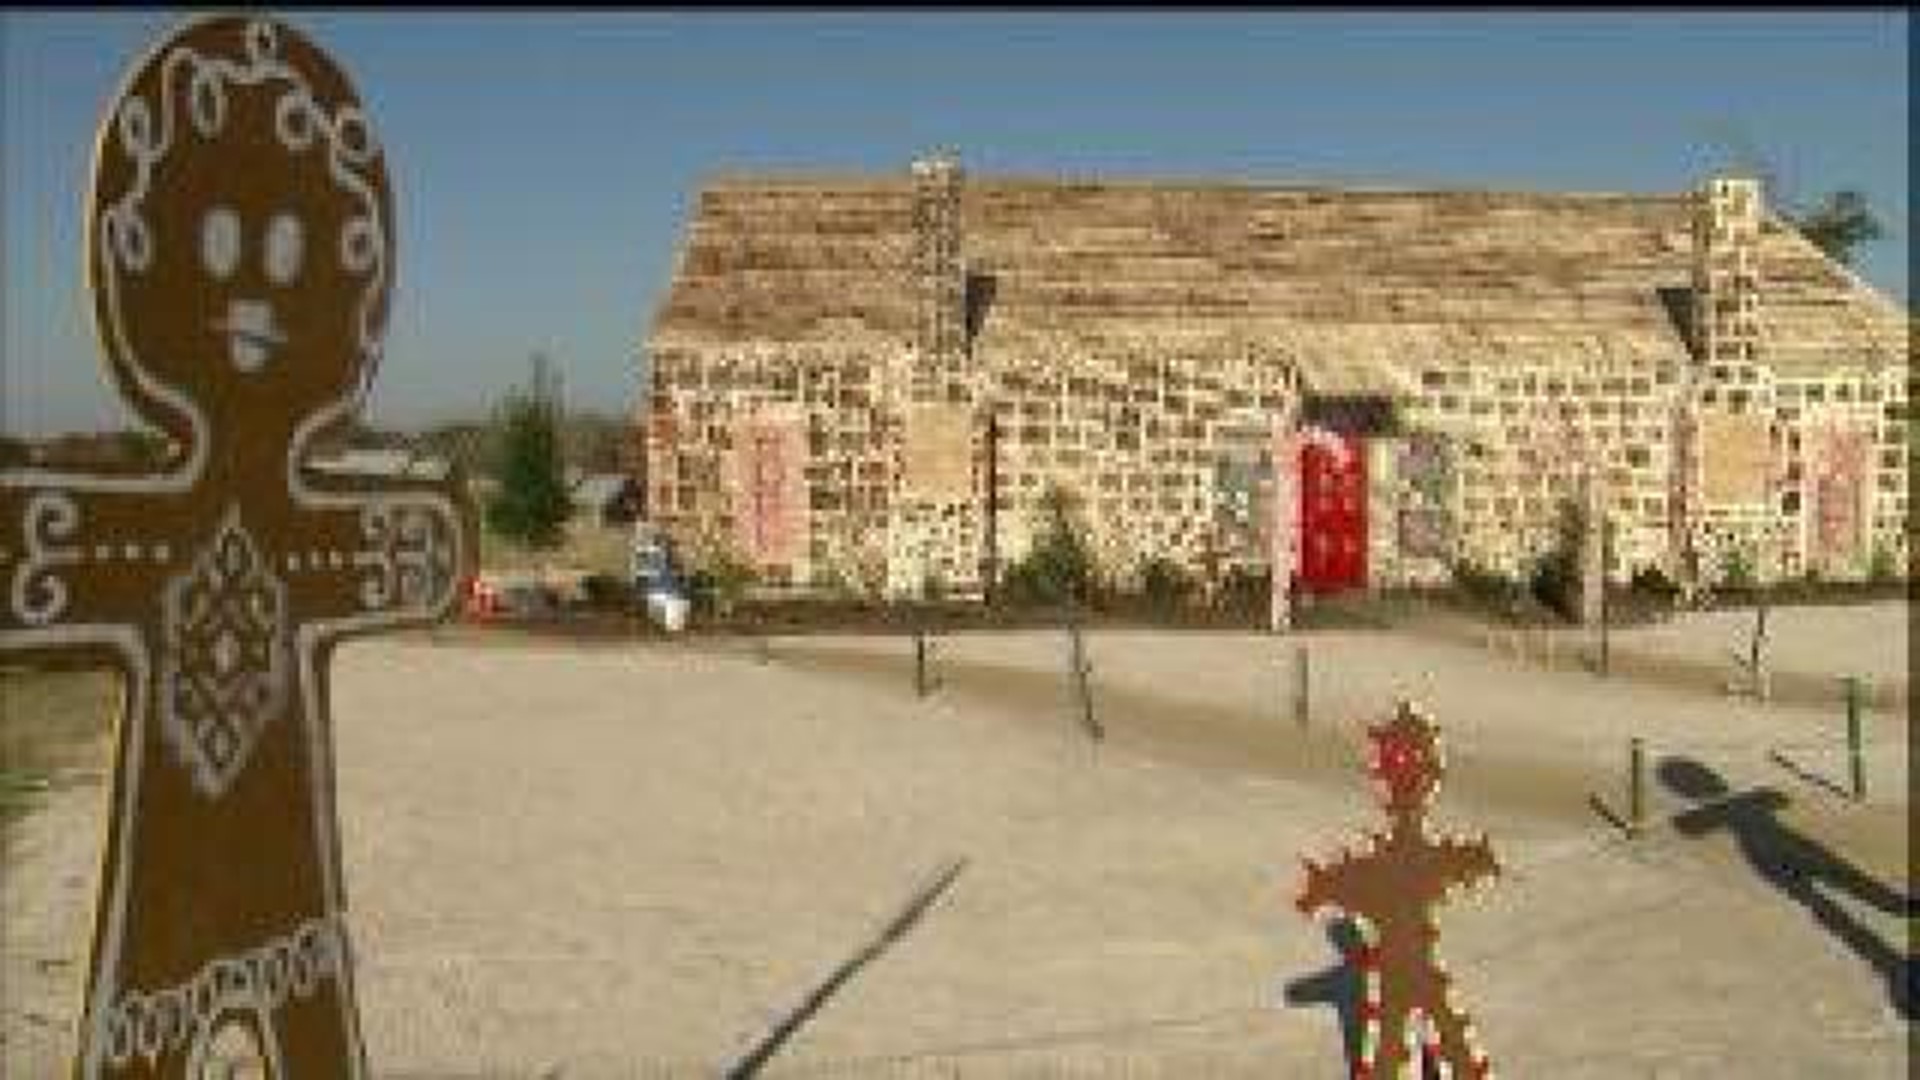 Giant gingerbread house made in Texas